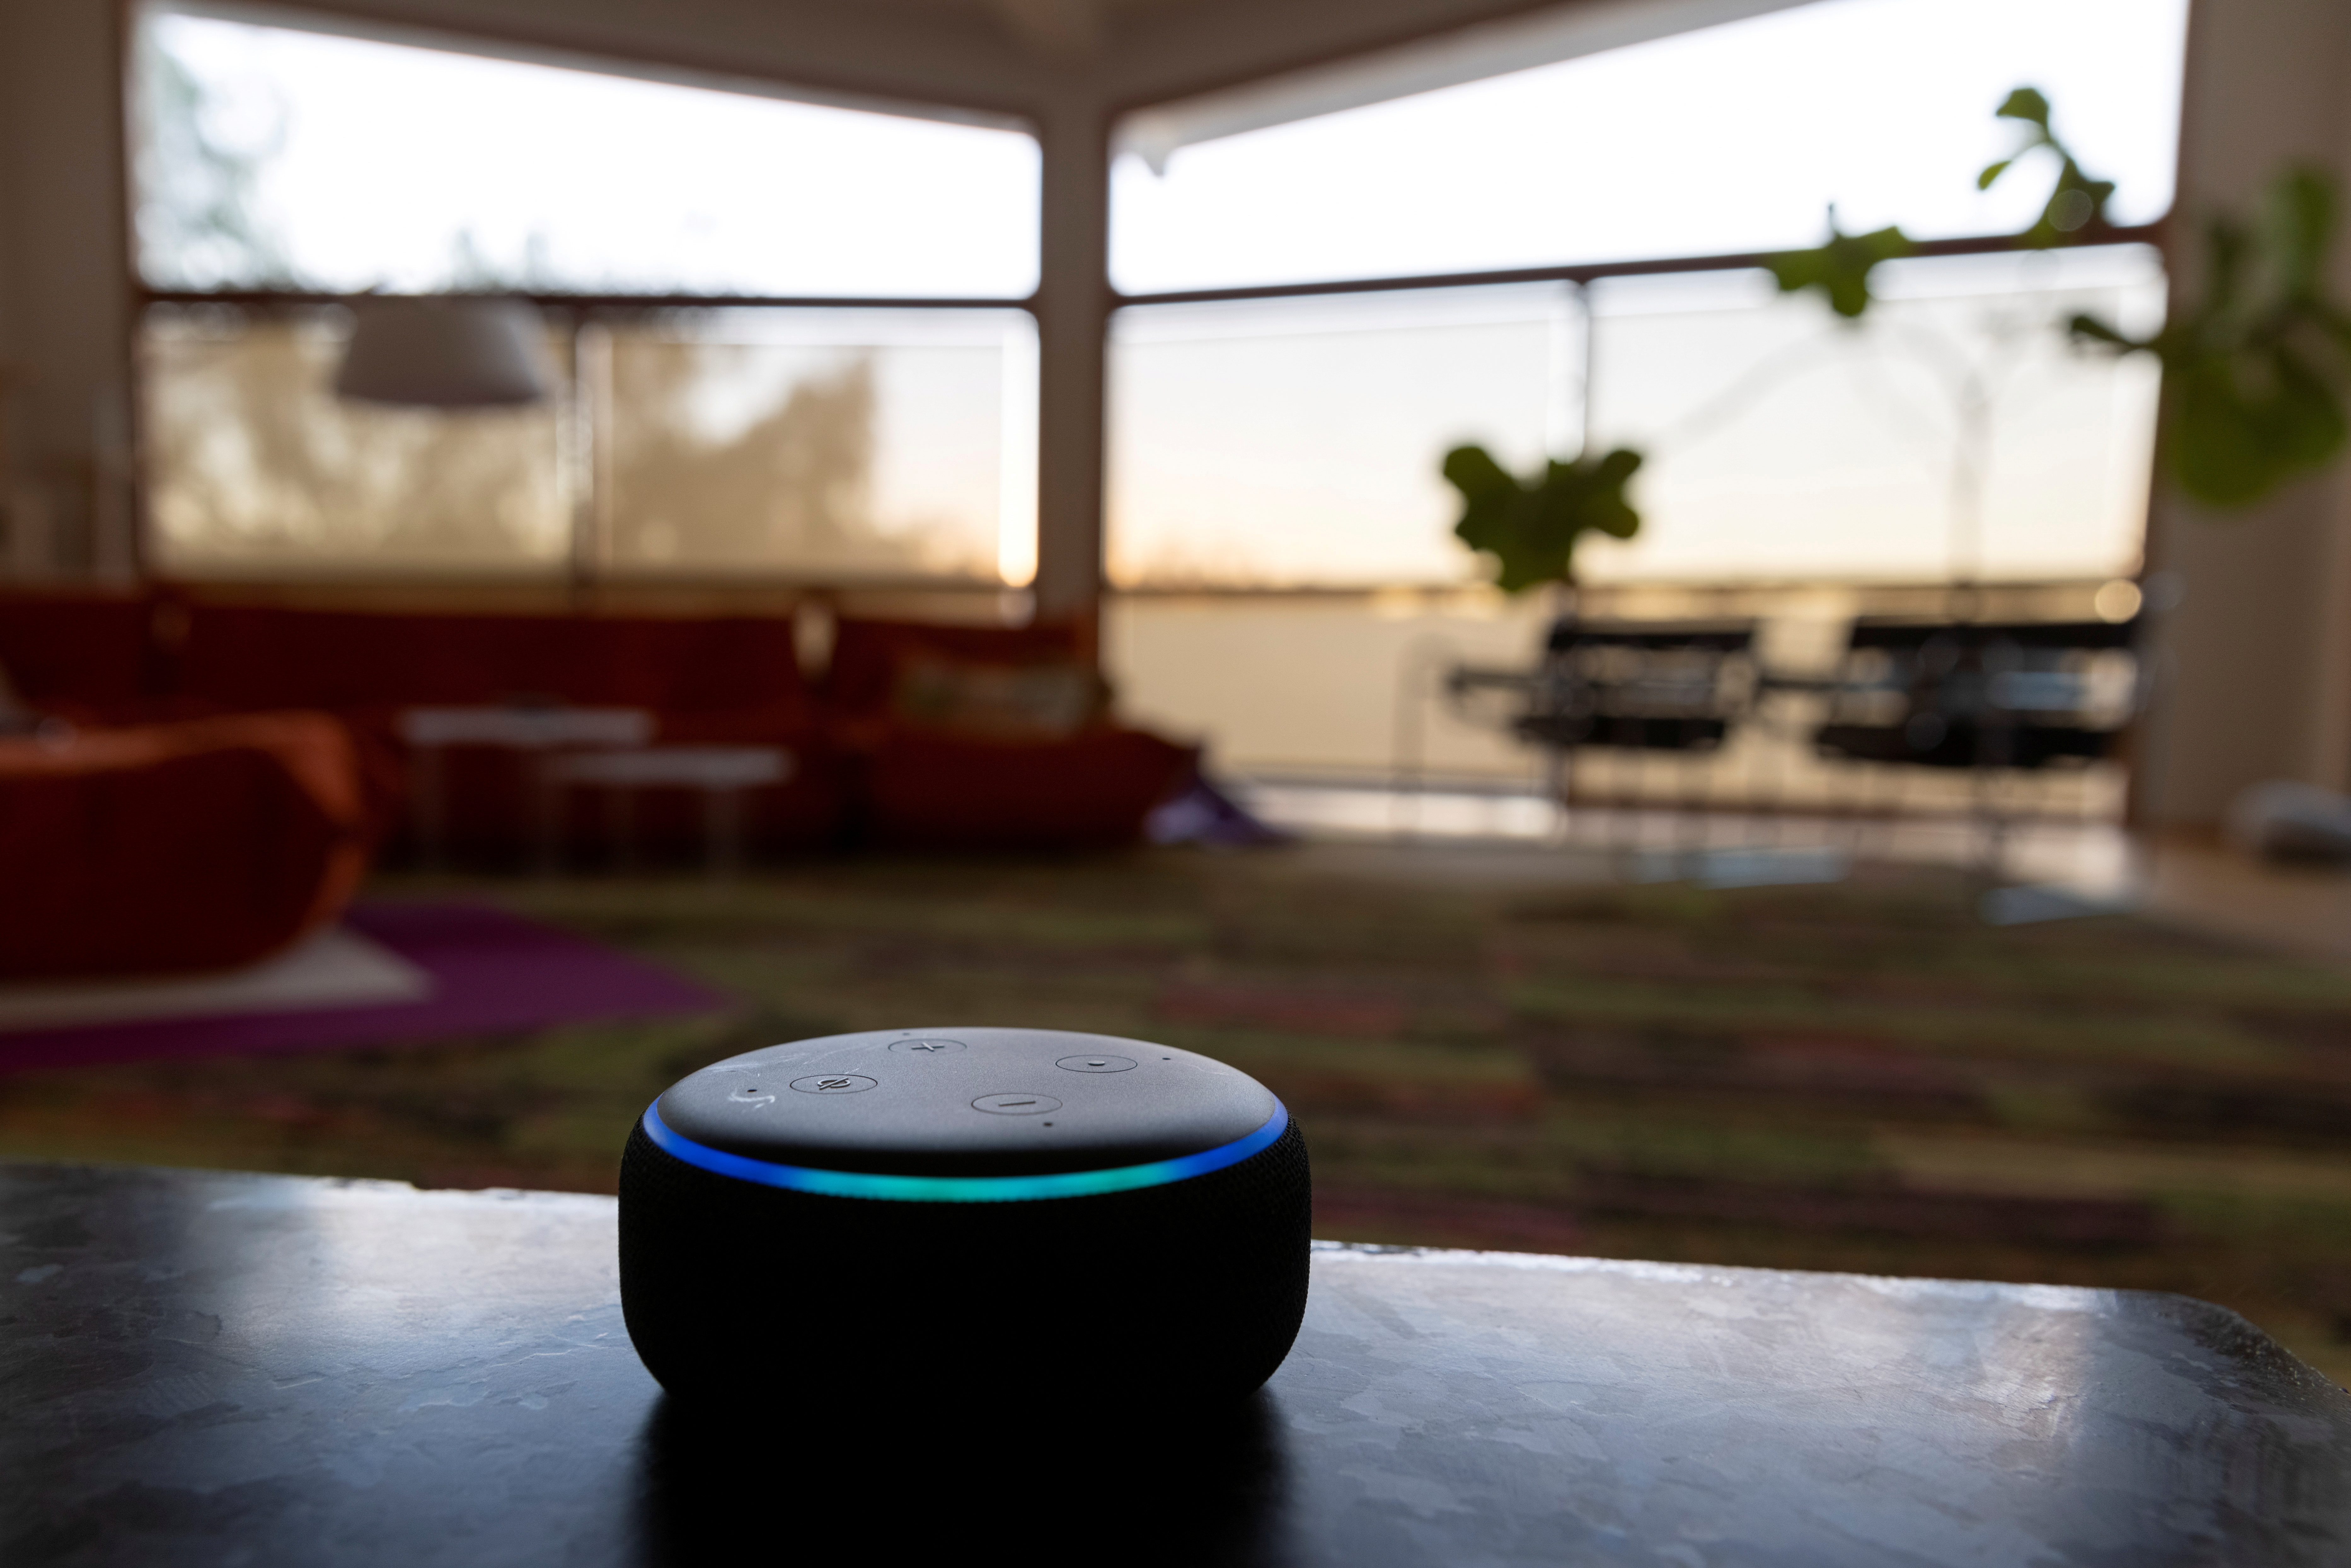 Amazon's DOT Alexa device is shown inside a house in this picture illustration taken October 1, 2021. REUTERS/Mike Blake/Illustration/File Photo